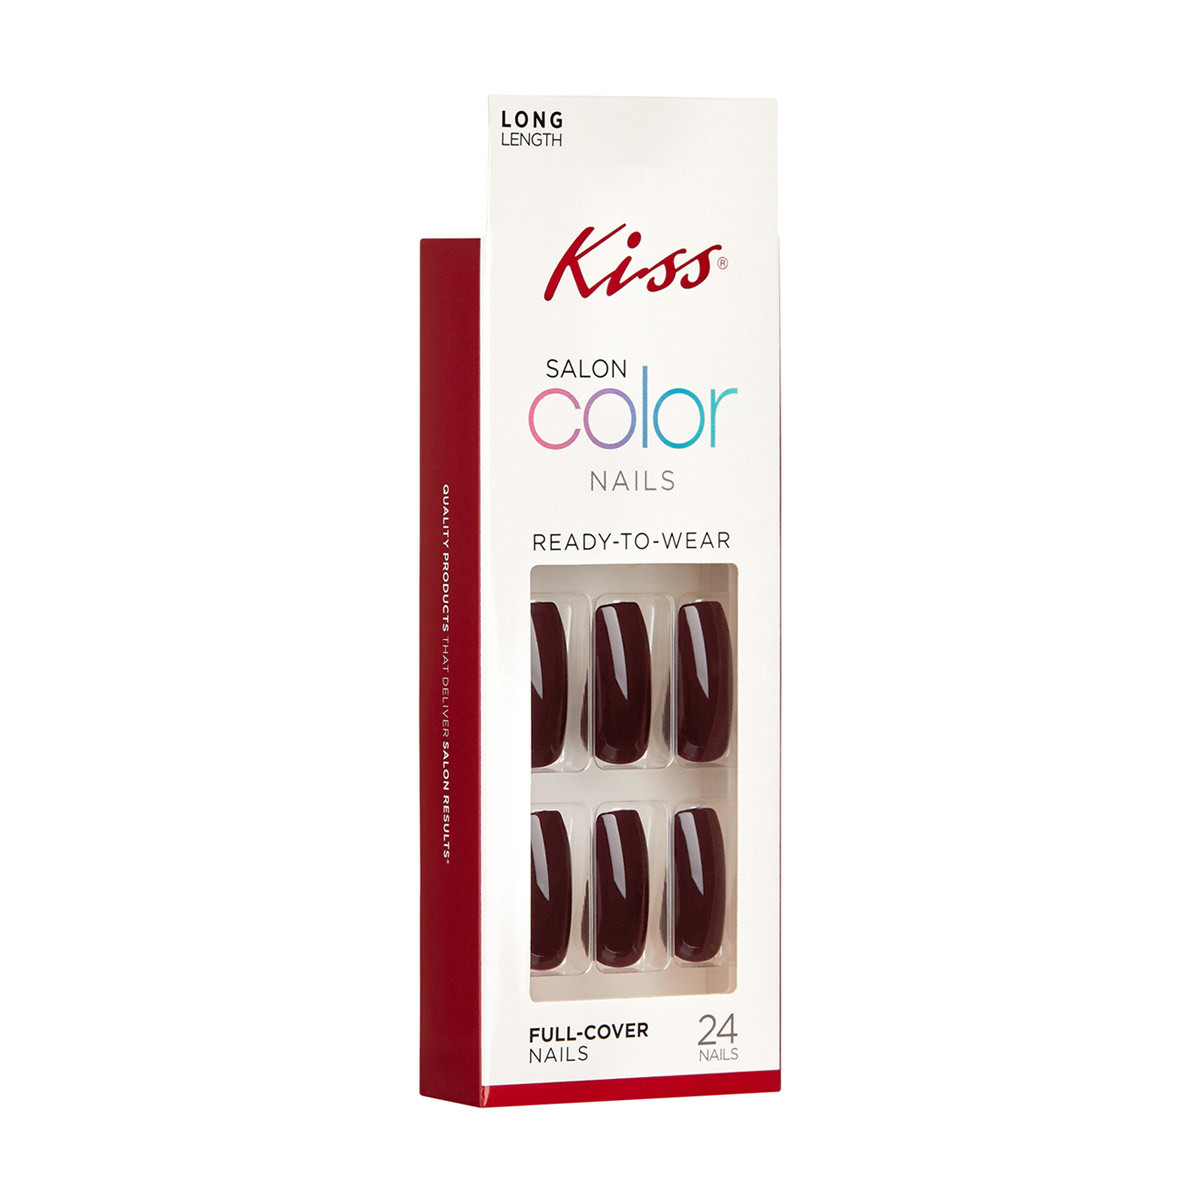 KISS Salon Color Ready-To-Wear Full Cover Nails